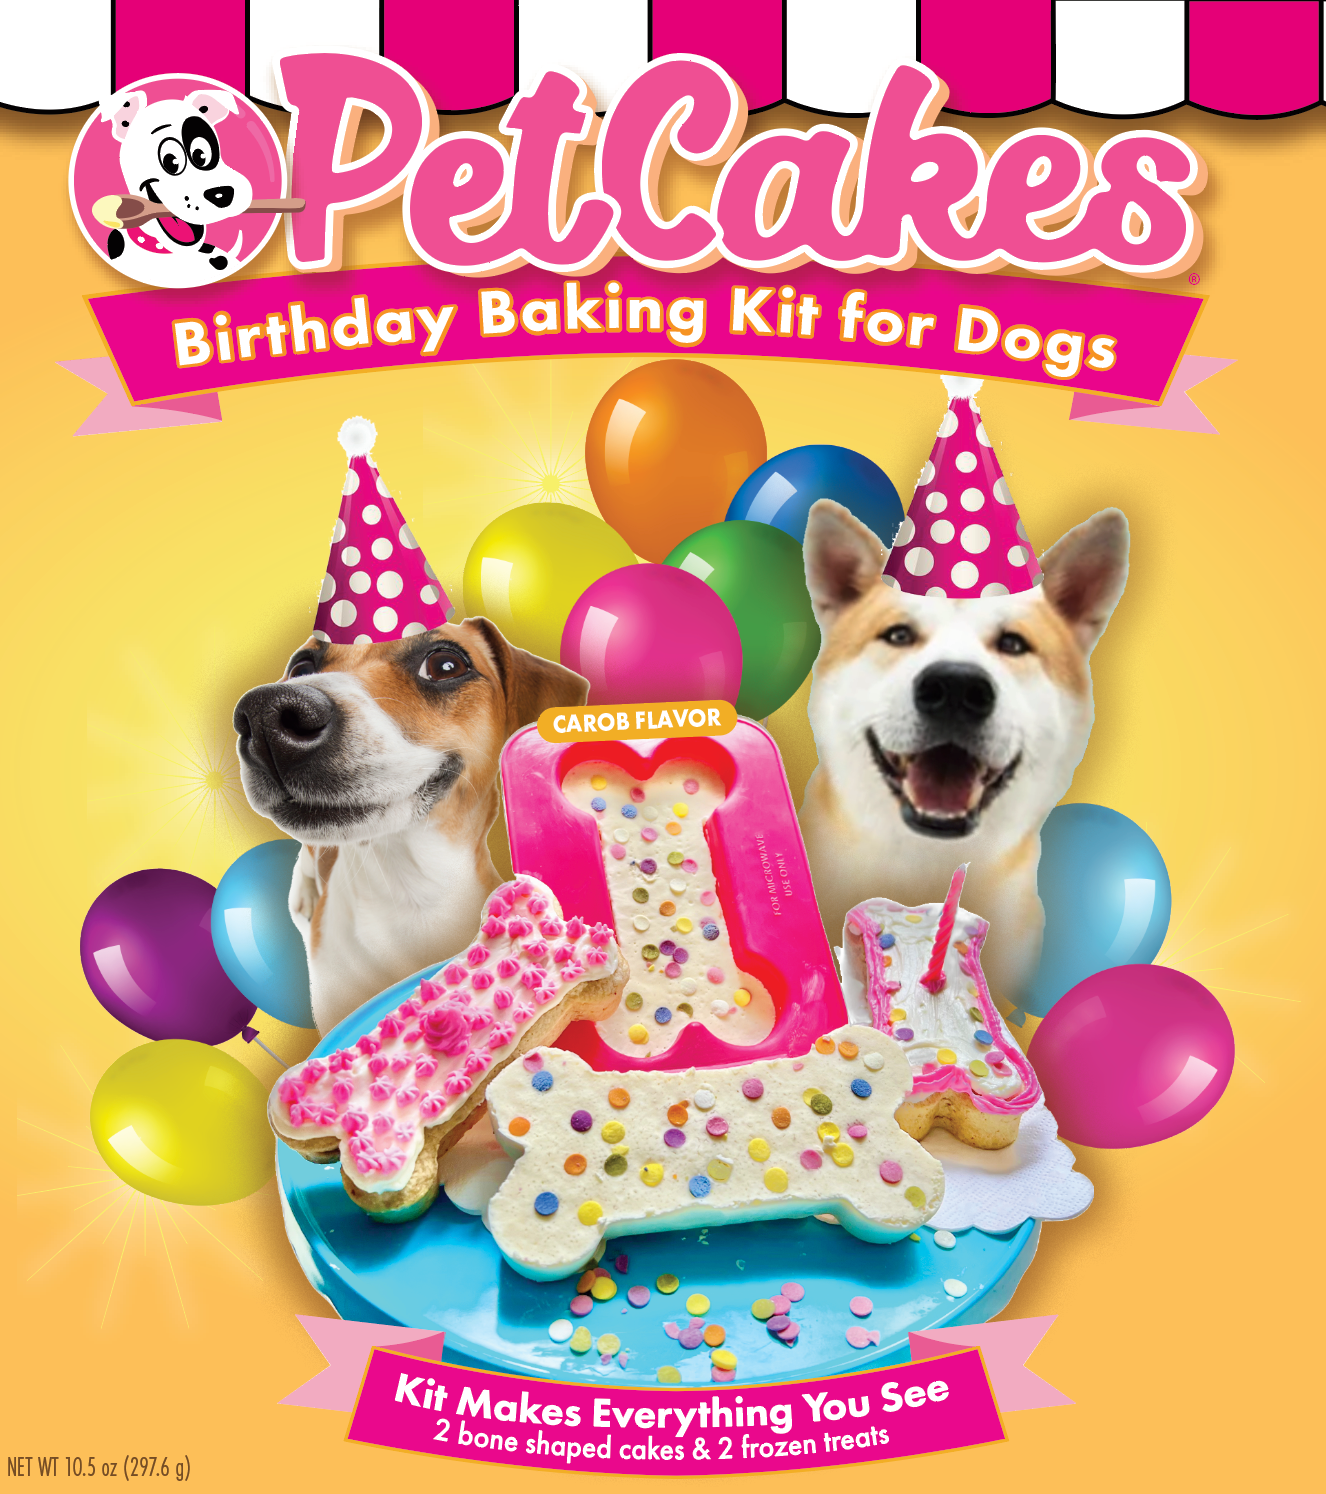 Birthday Baking Kit for Dogs - 2 Cakes + 2 Ice Cream + Candle & Sprinkles